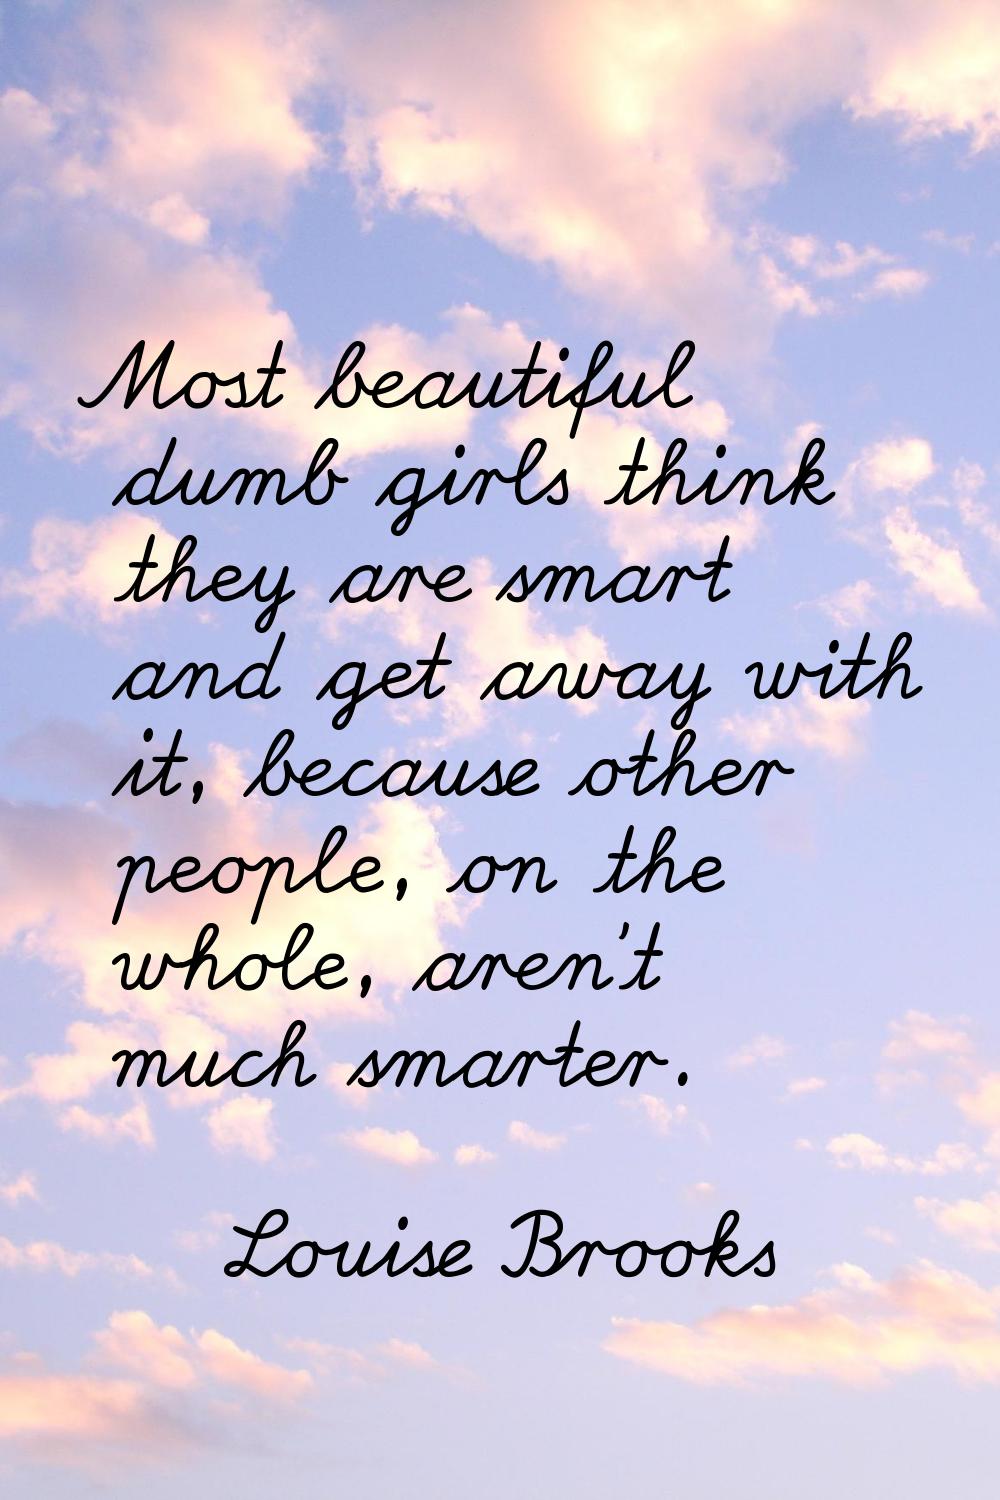 Most beautiful dumb girls think they are smart and get away with it, because other people, on the w